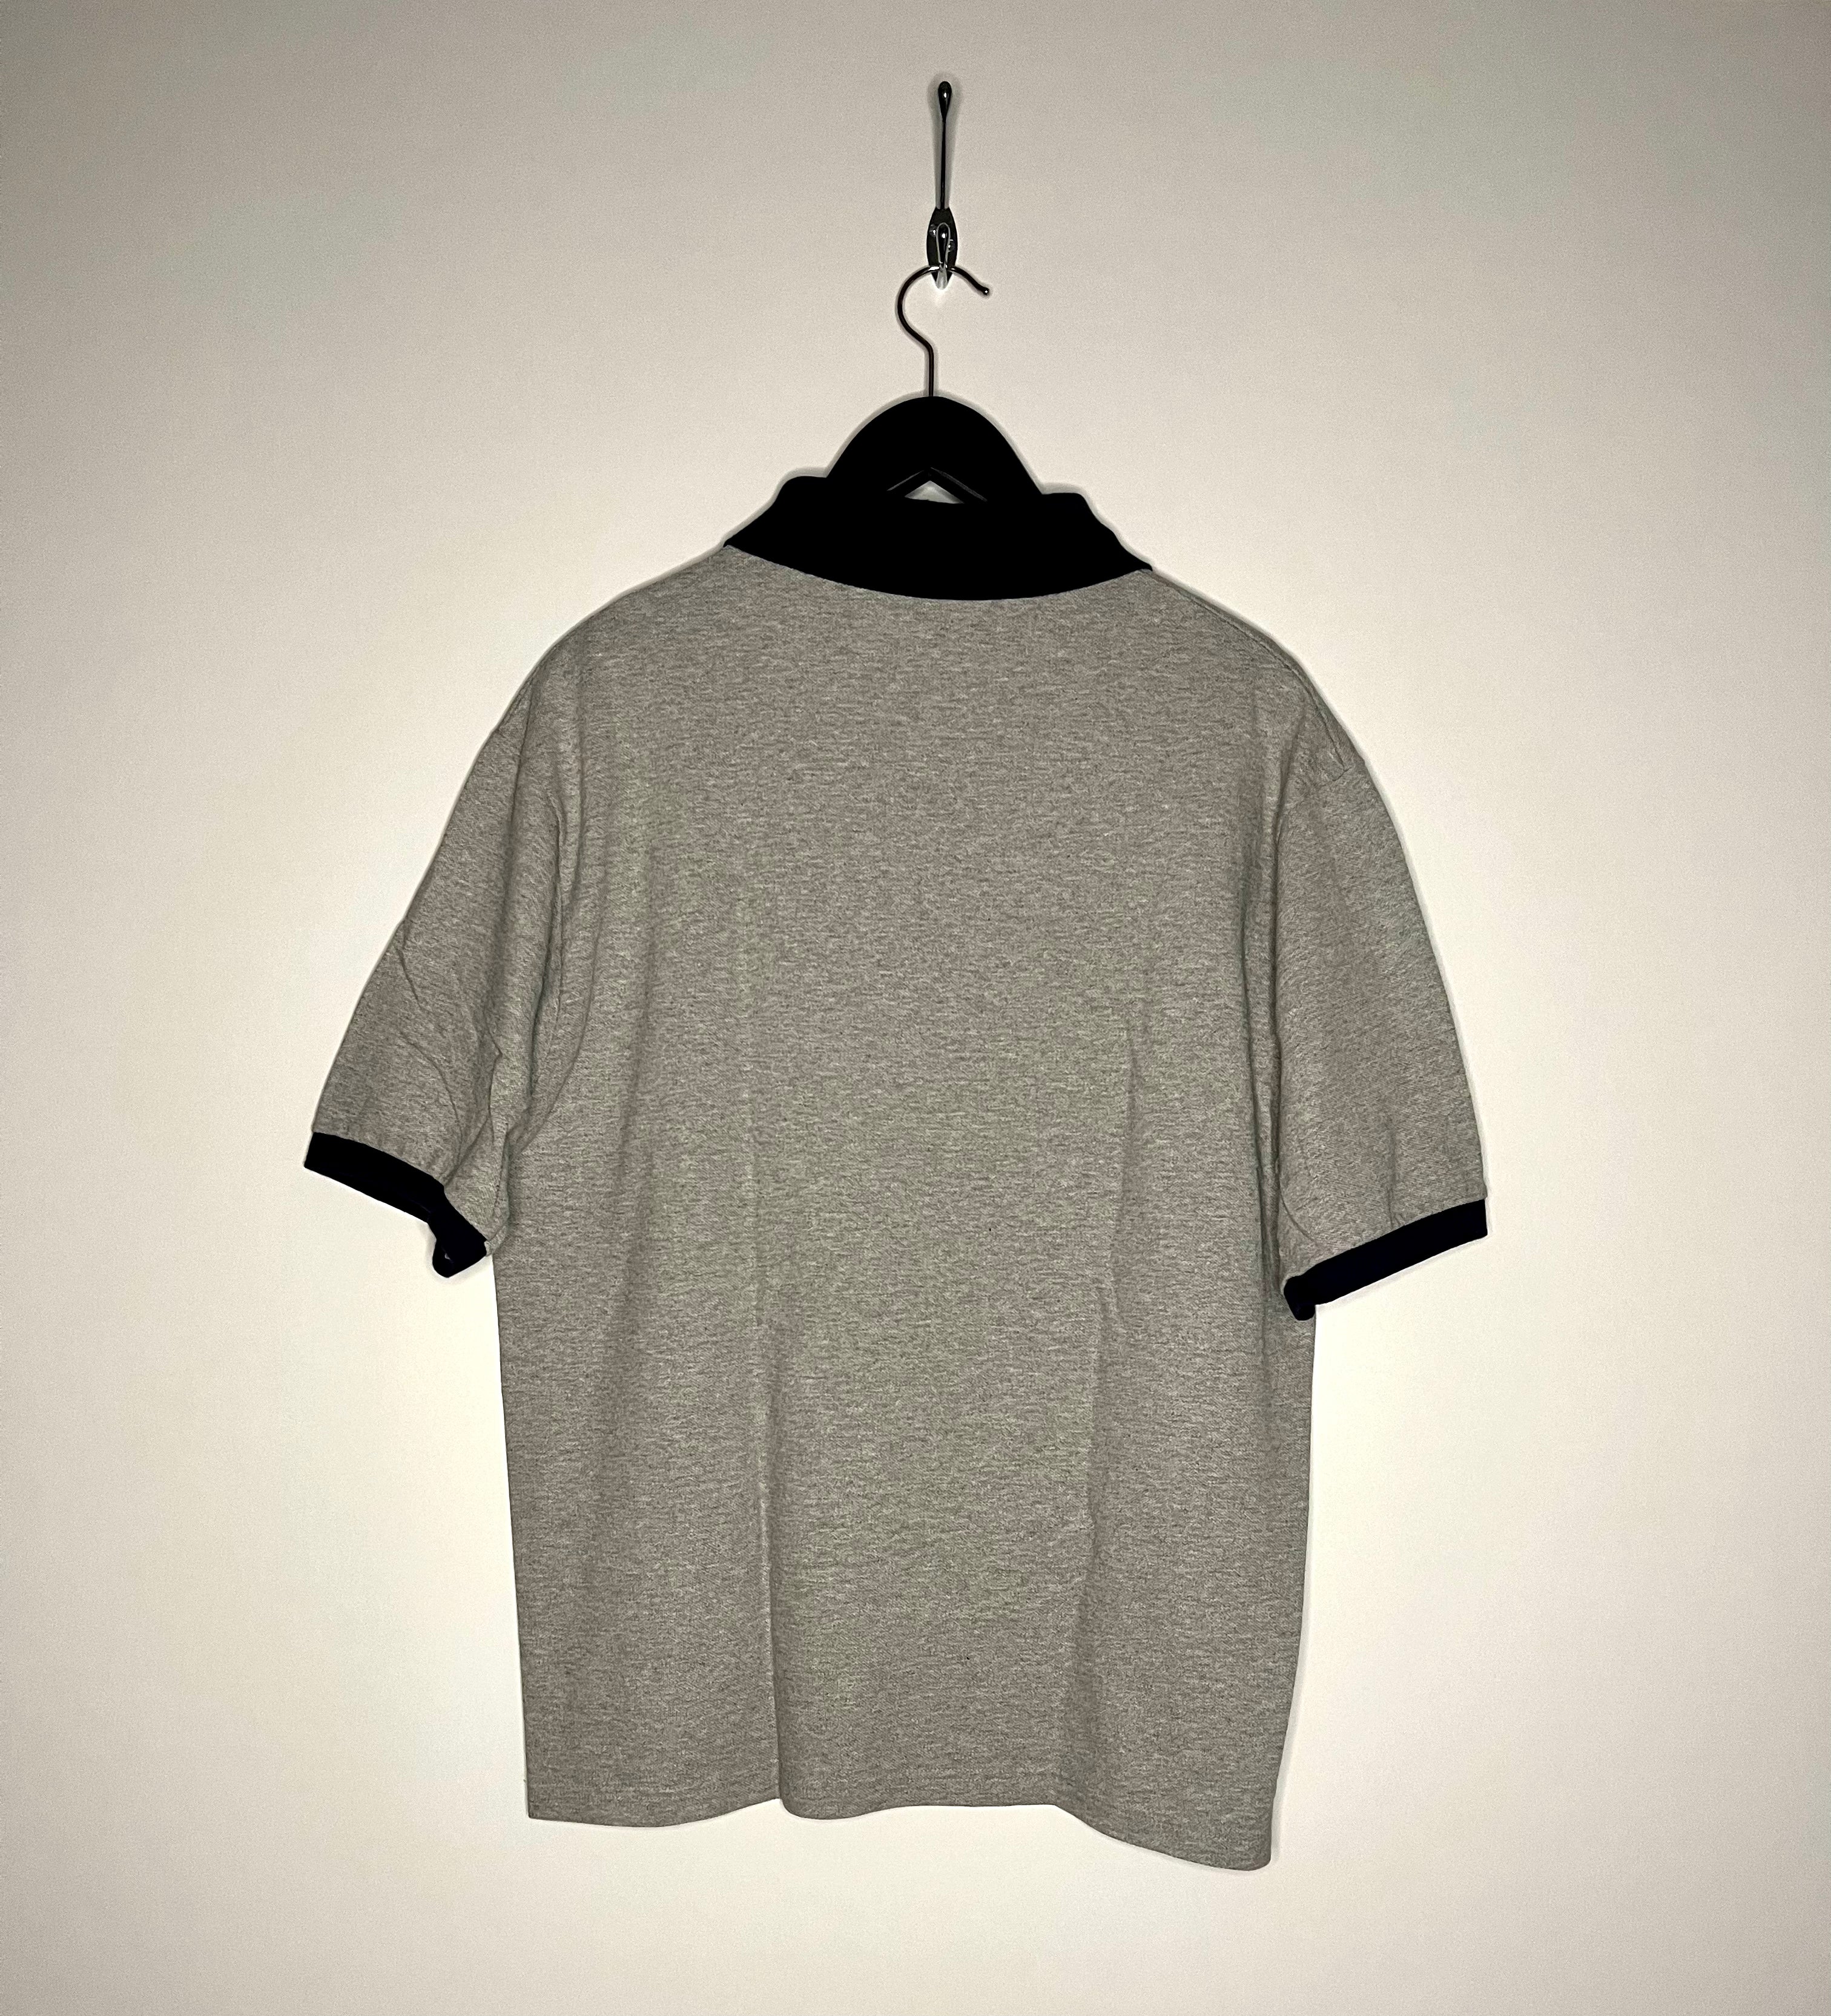 Jerzees Chief Polo Gray Size L 